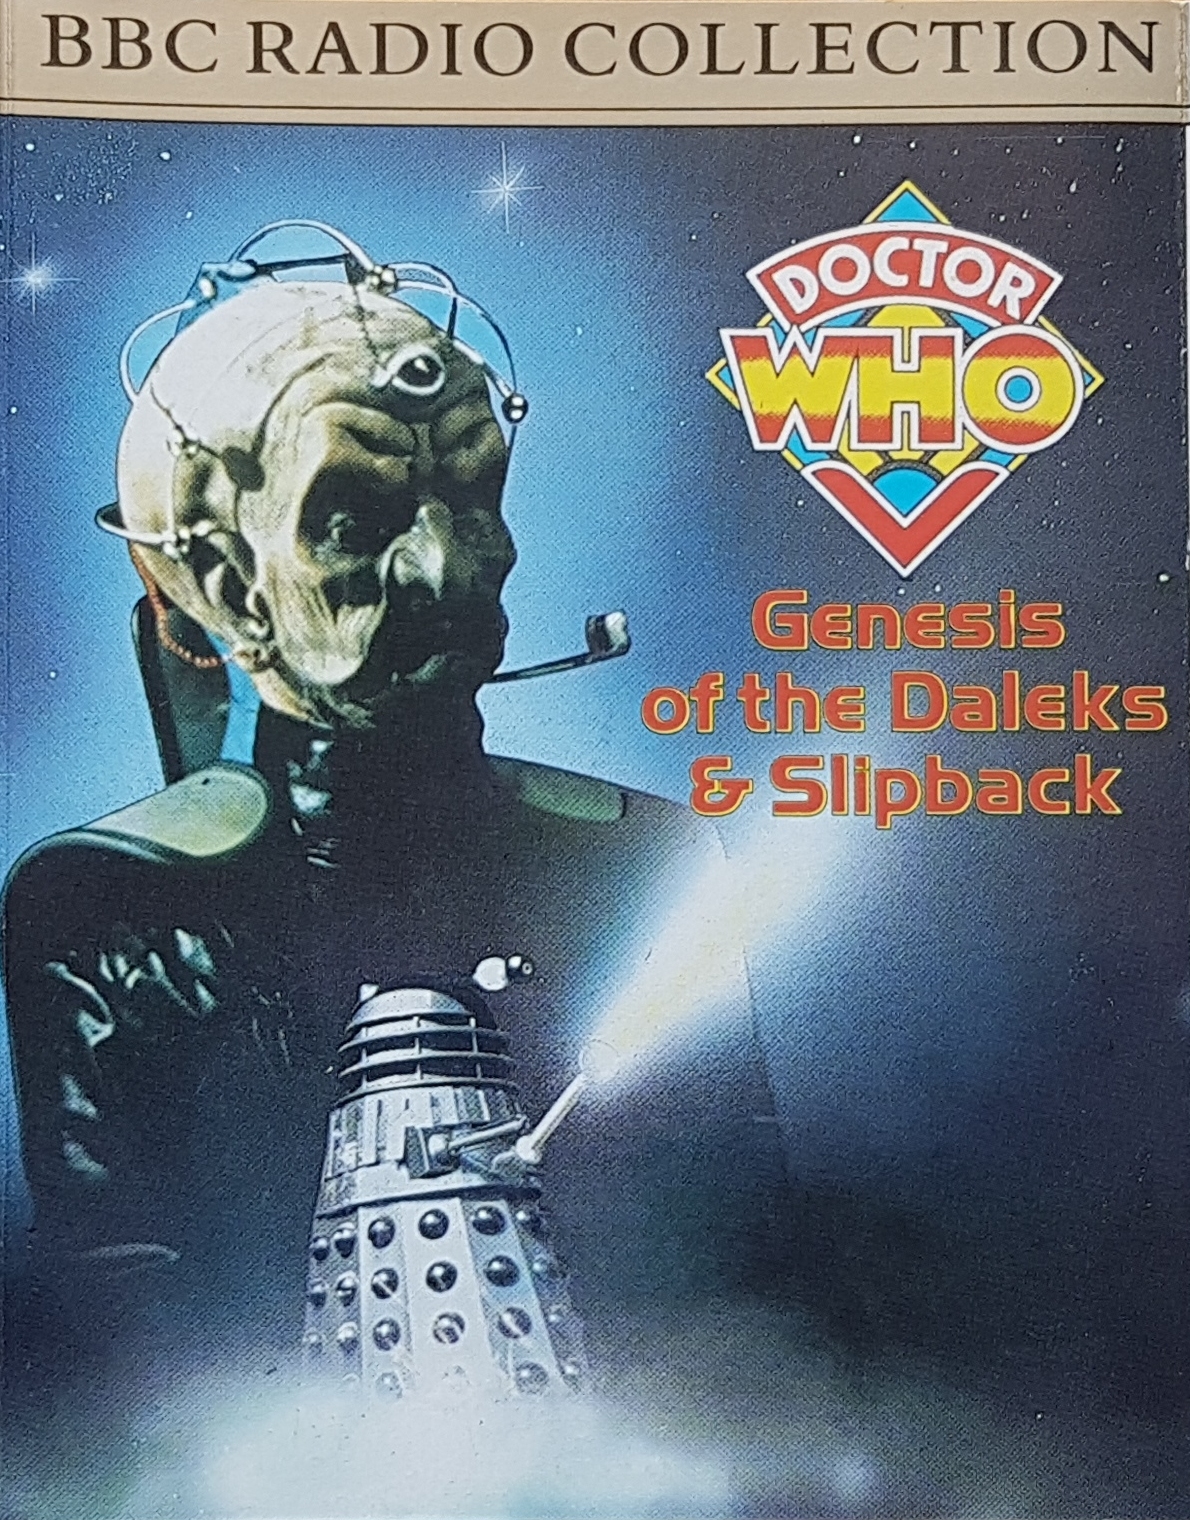 Picture of ZBBC 1020 Doctor Who - Genesis of the Daleks / Slipback by artist Terry nation / Eric Saward from the BBC cassettes - Records and Tapes library